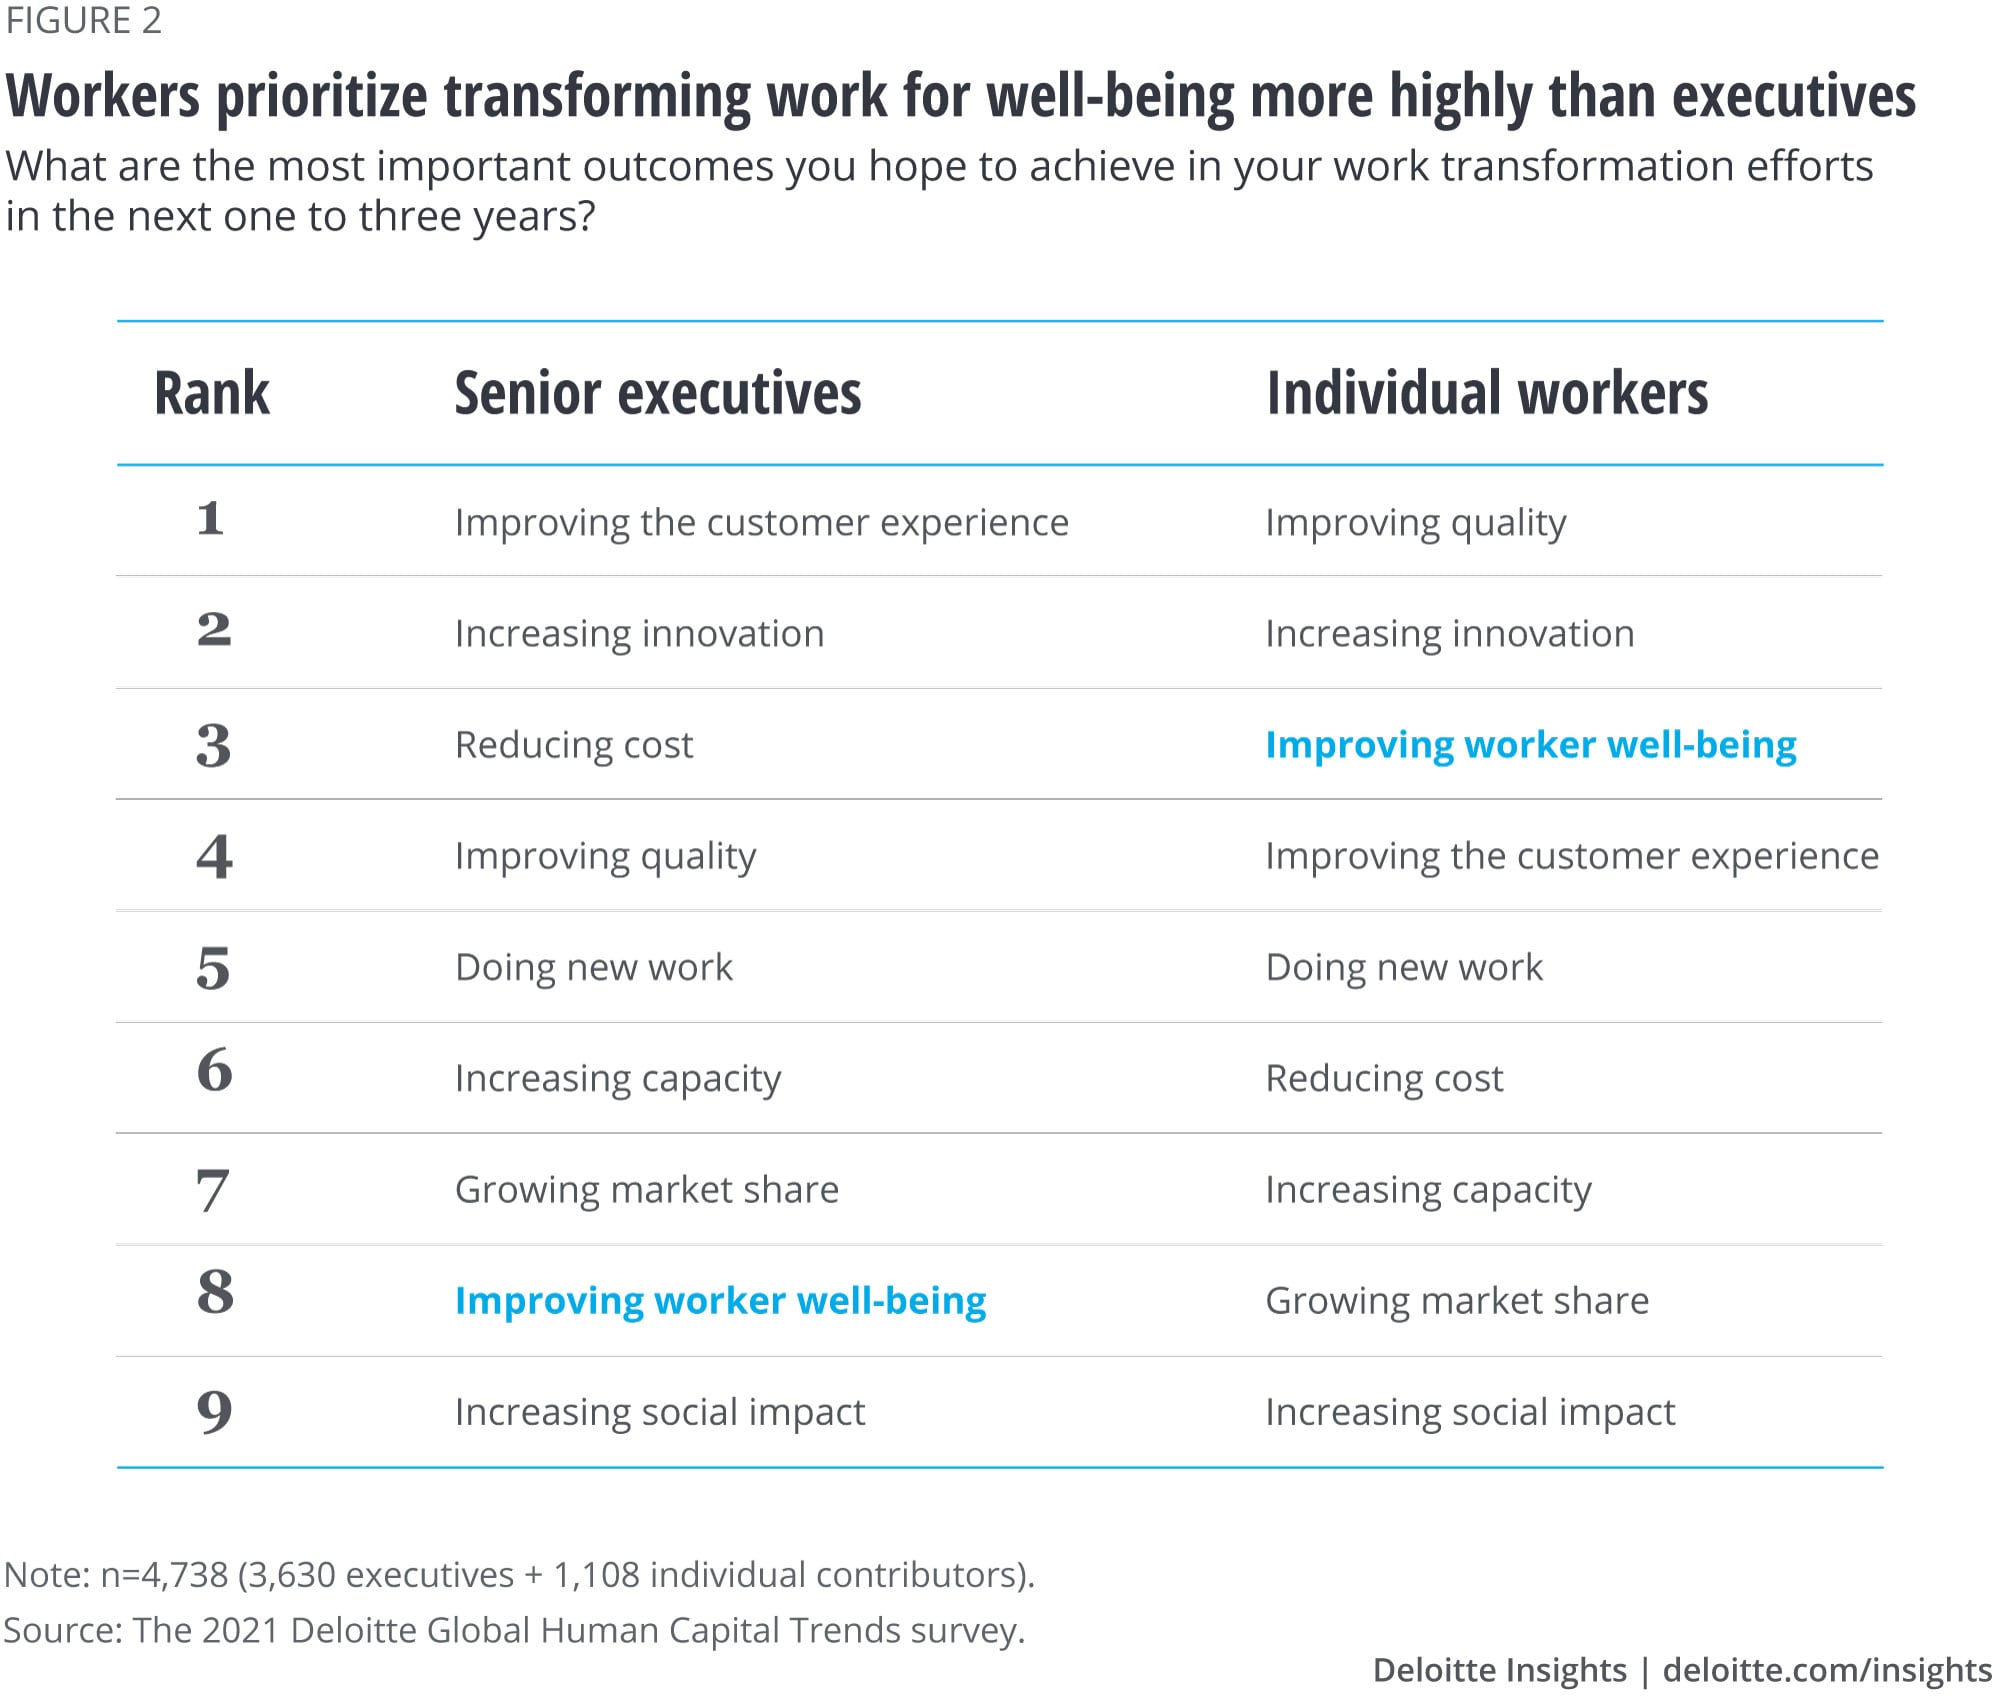 Workers prioritize transforming work for well-being more highly than executives